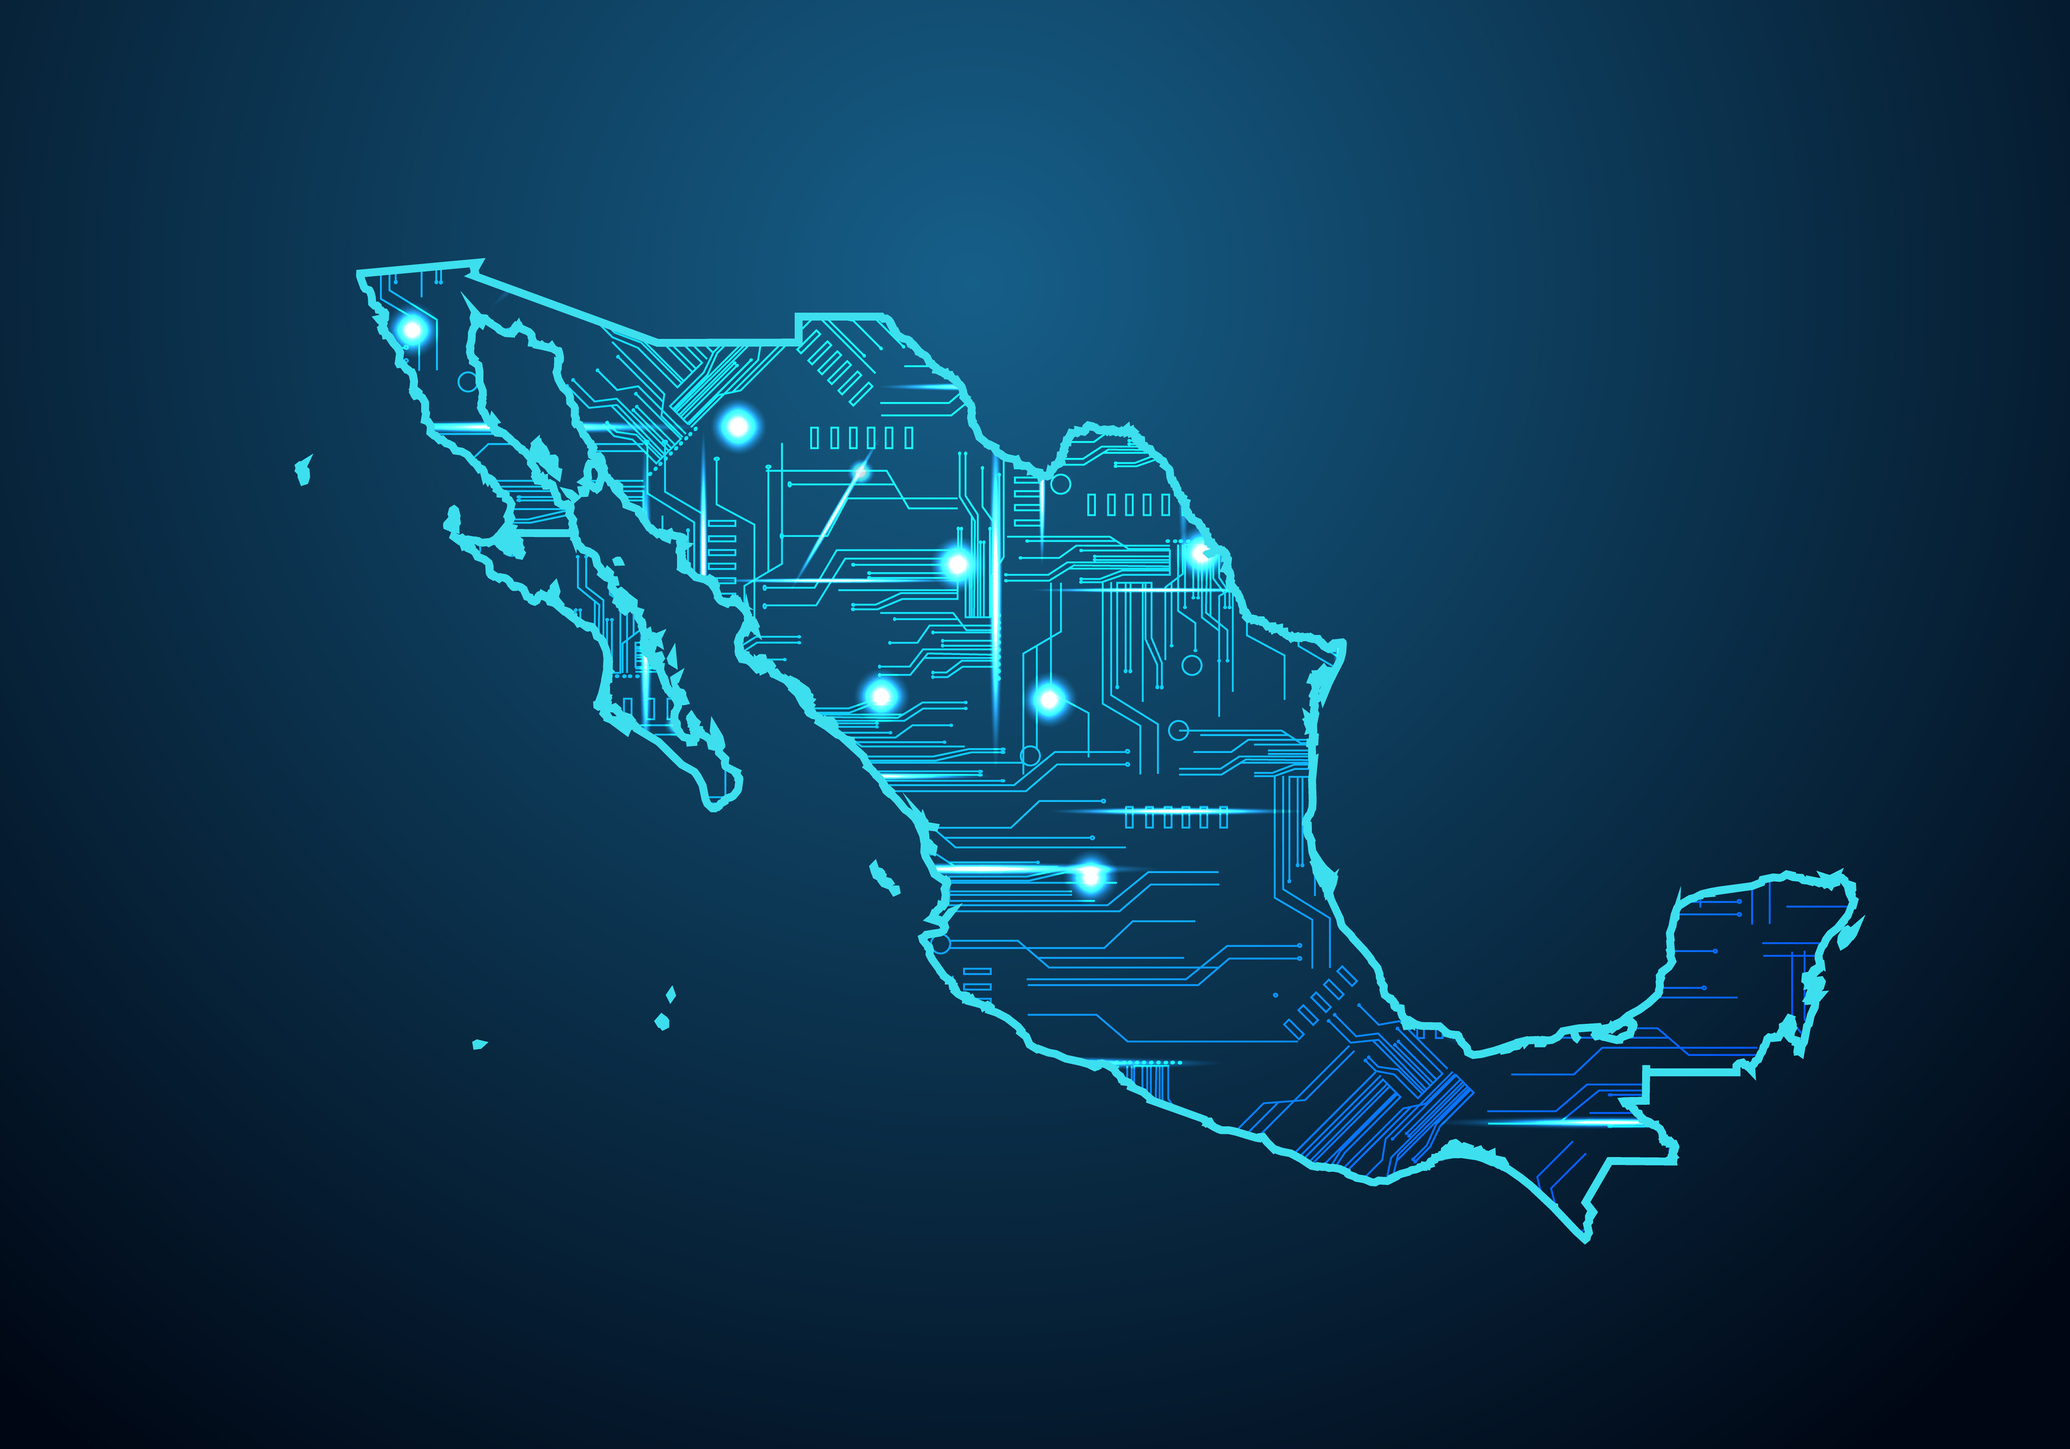 Abstract futuristic map of mexico. Circuit Board Design Electric of the region. Technology background.